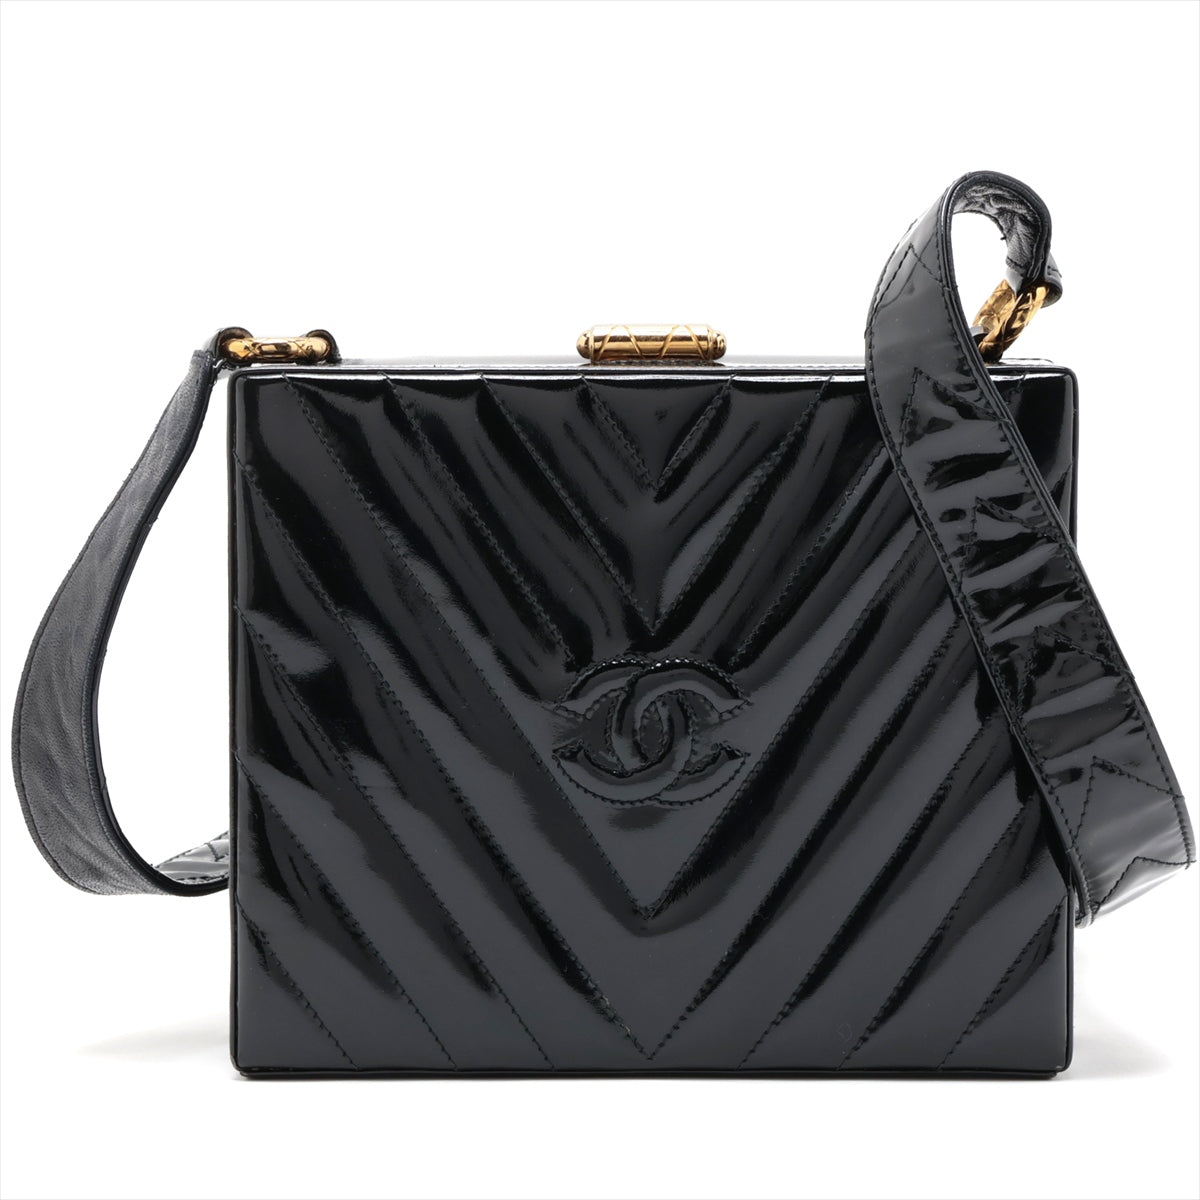 Chanel V Stitch Patent Leather Shoulder Bag Coco Mark Black Gold Metal Fittings The fastener makes a slight noise